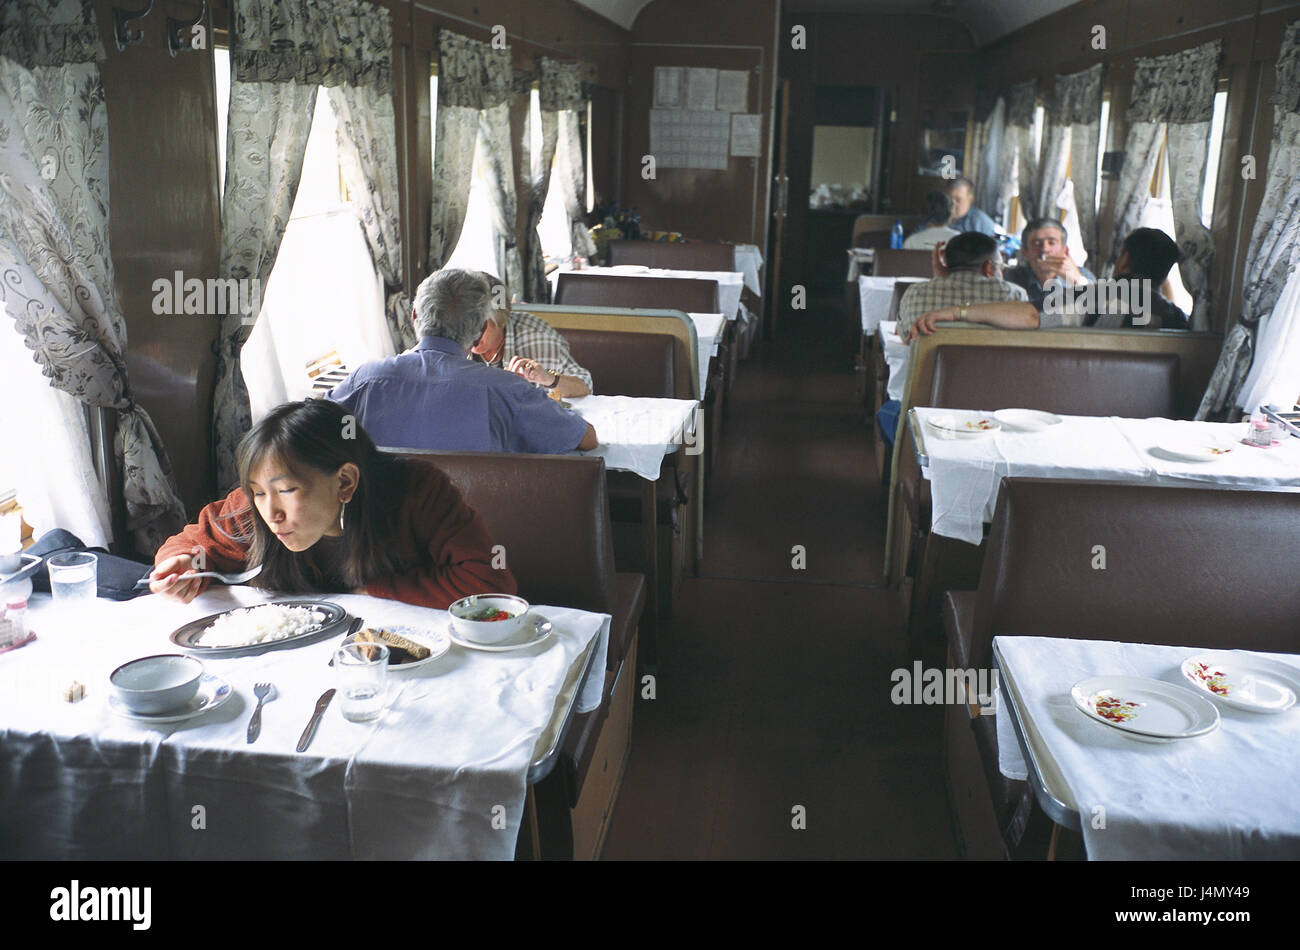 Russia, Siberia, trans-Siberian railway, dining car, passengers, no model release trans-Siberia express train, Russian express train, means of transportation publicly, train, trajectory, transportation of human beings, board restaurant, tourist, eat, drink, train journey, train driving, train journey, travelling, go away, section, railroad line, trajectory traffic, rail transport, experience, vacation, leisure time Stock Photo